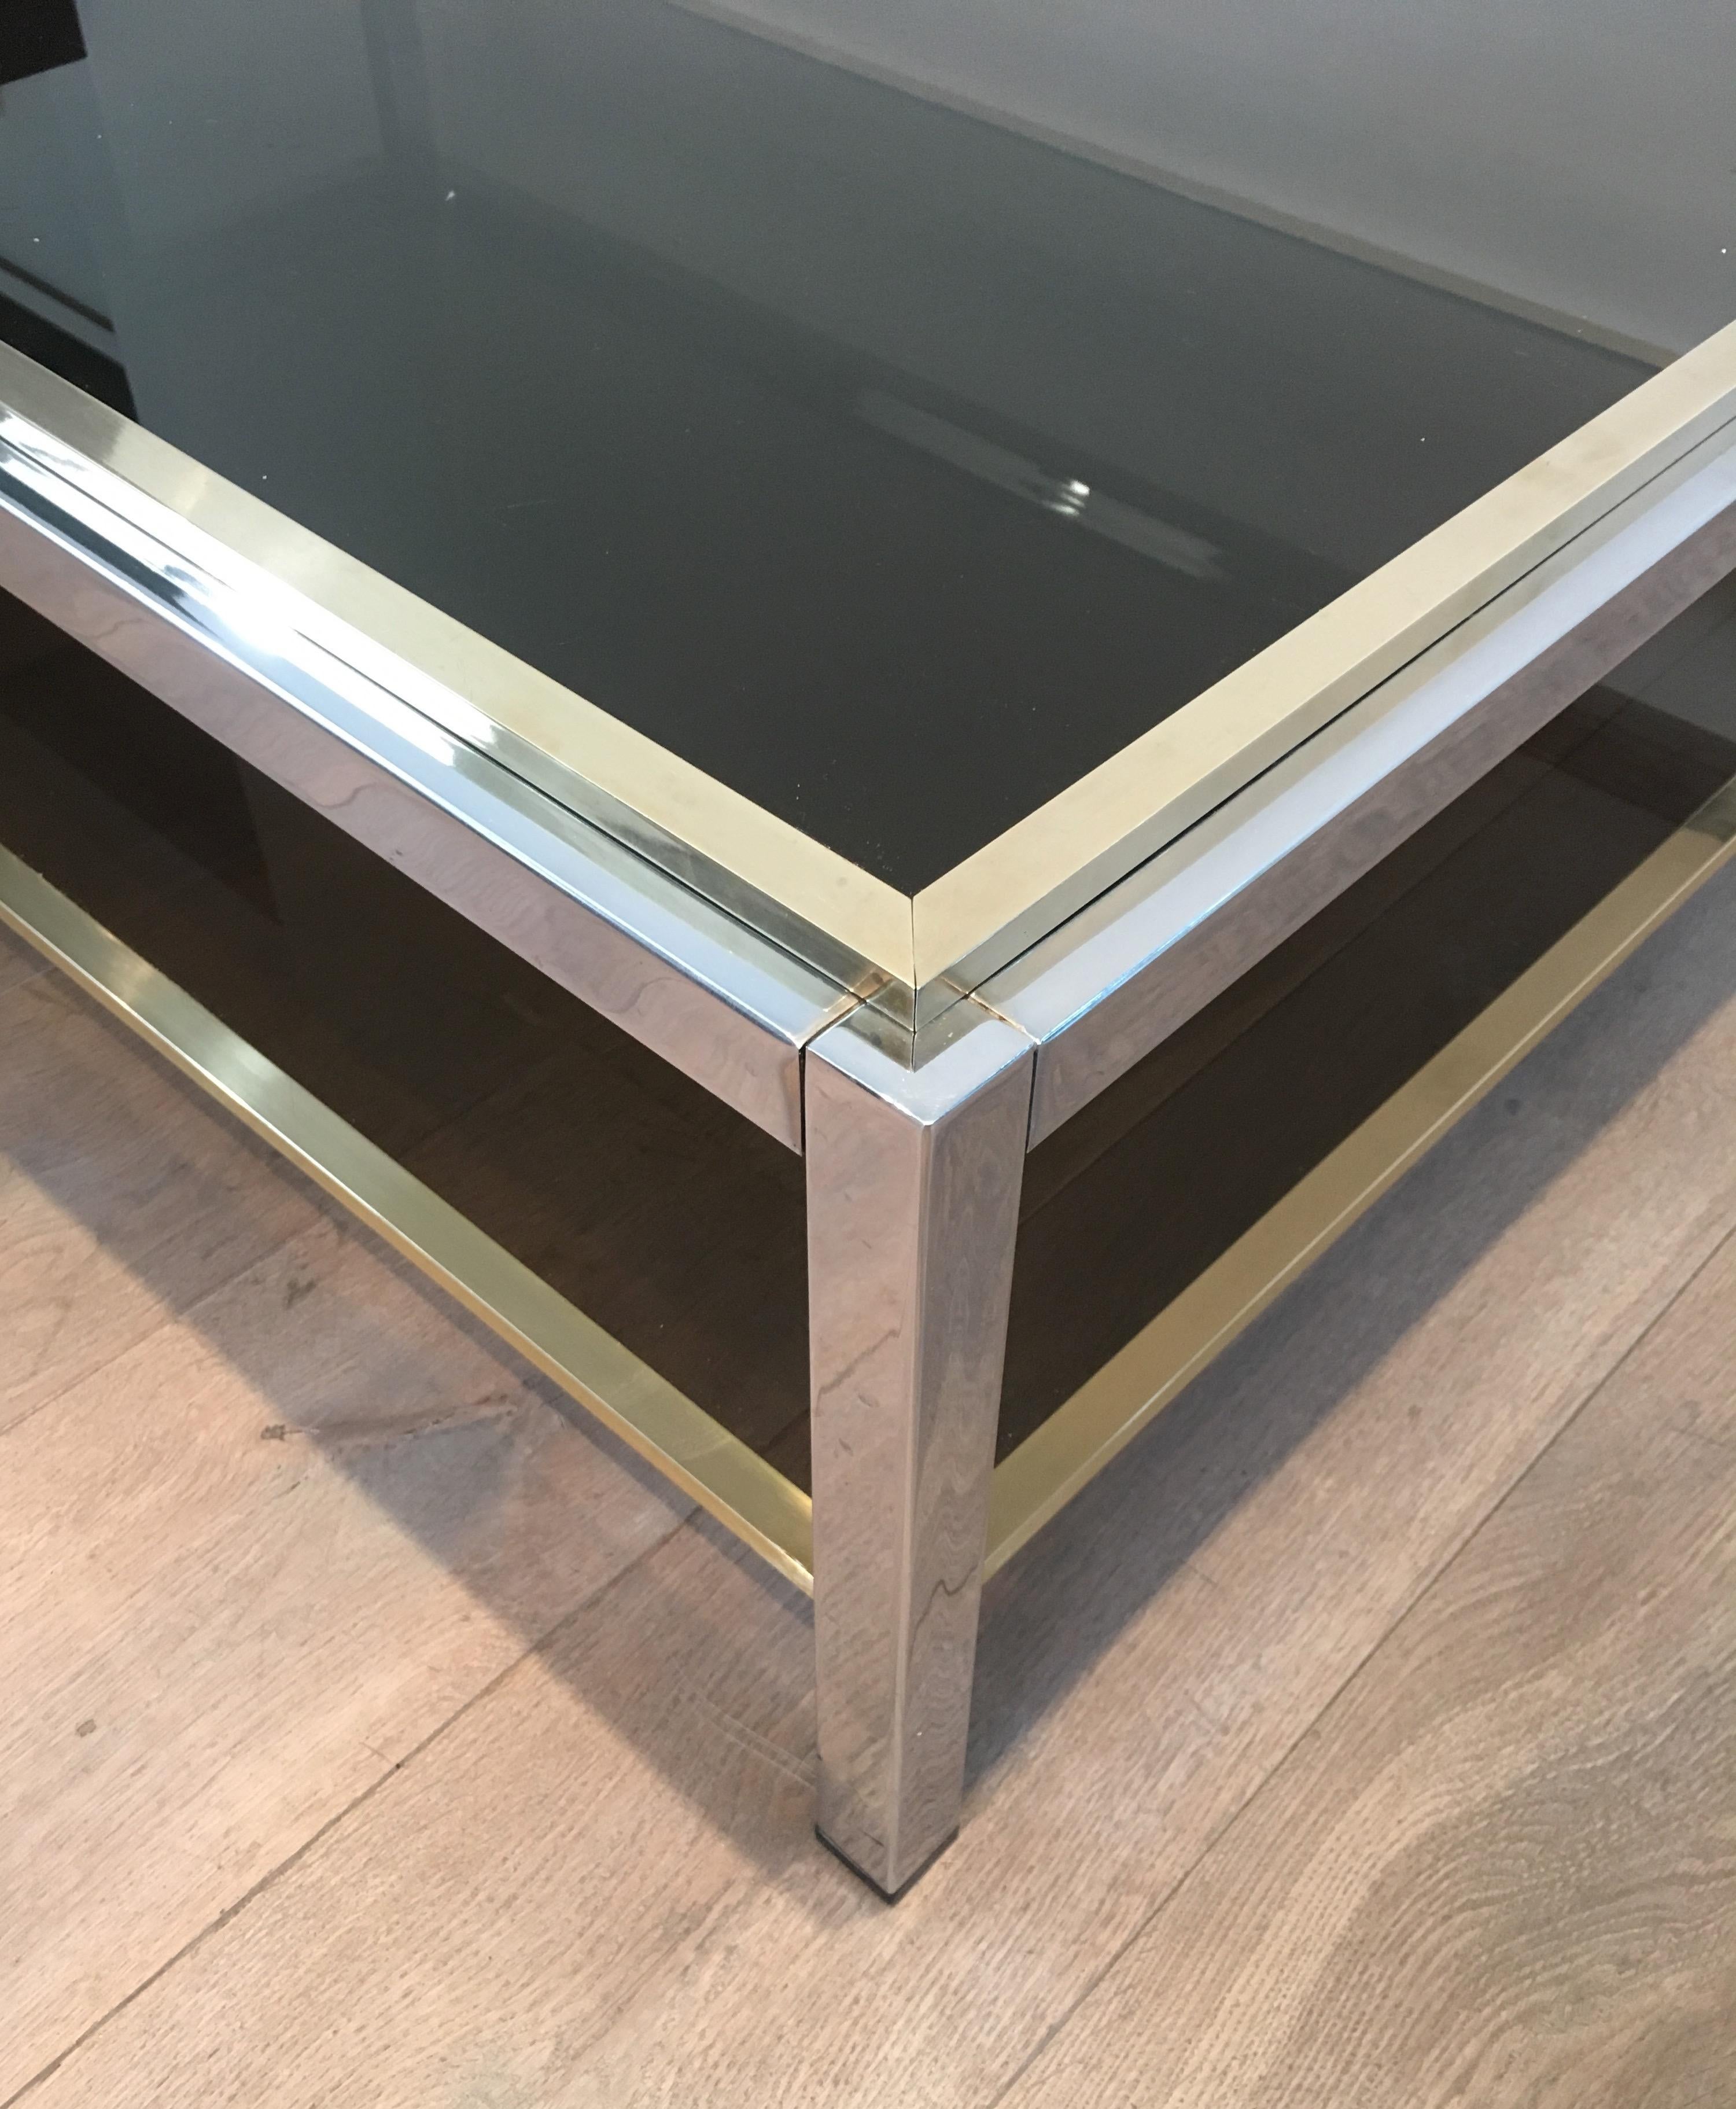 Late 20th Century Attributed to Willy Rizzo, Large Chrome and Brass Coffee Table with Smoked Glass